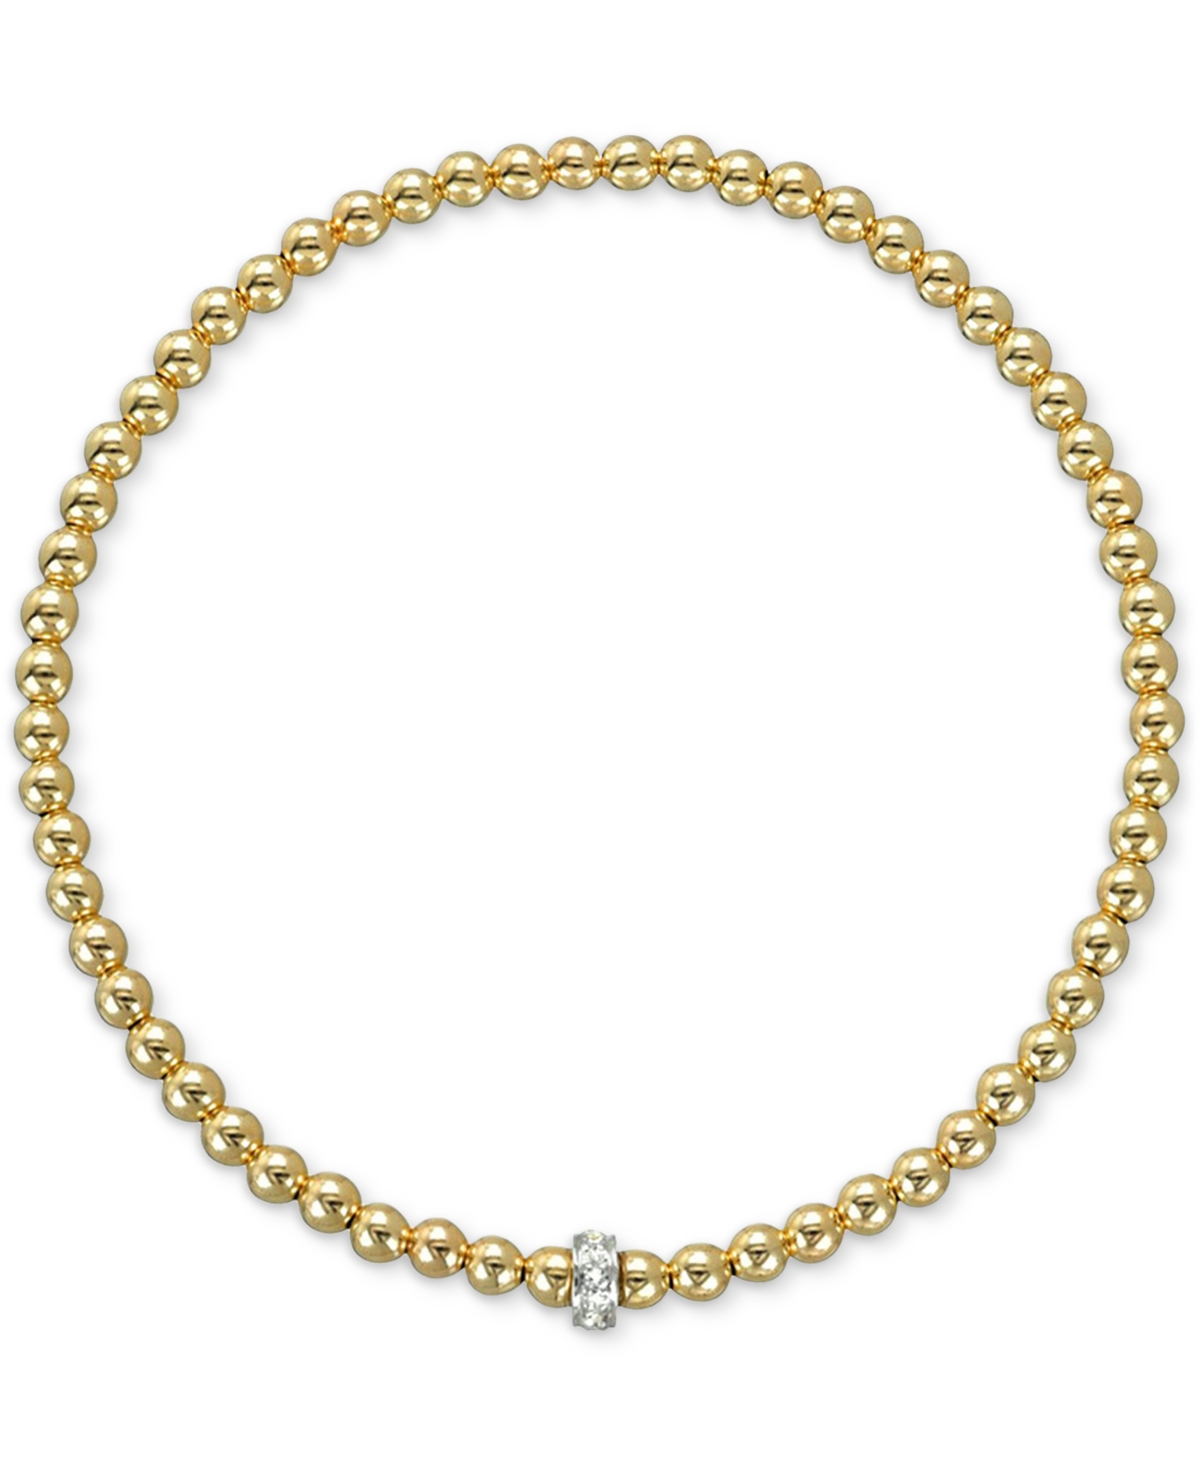 Zoe Lev Diamond Accent Rondelle Polished Bead Stretch Bracelet In 14k Two-tone Gold